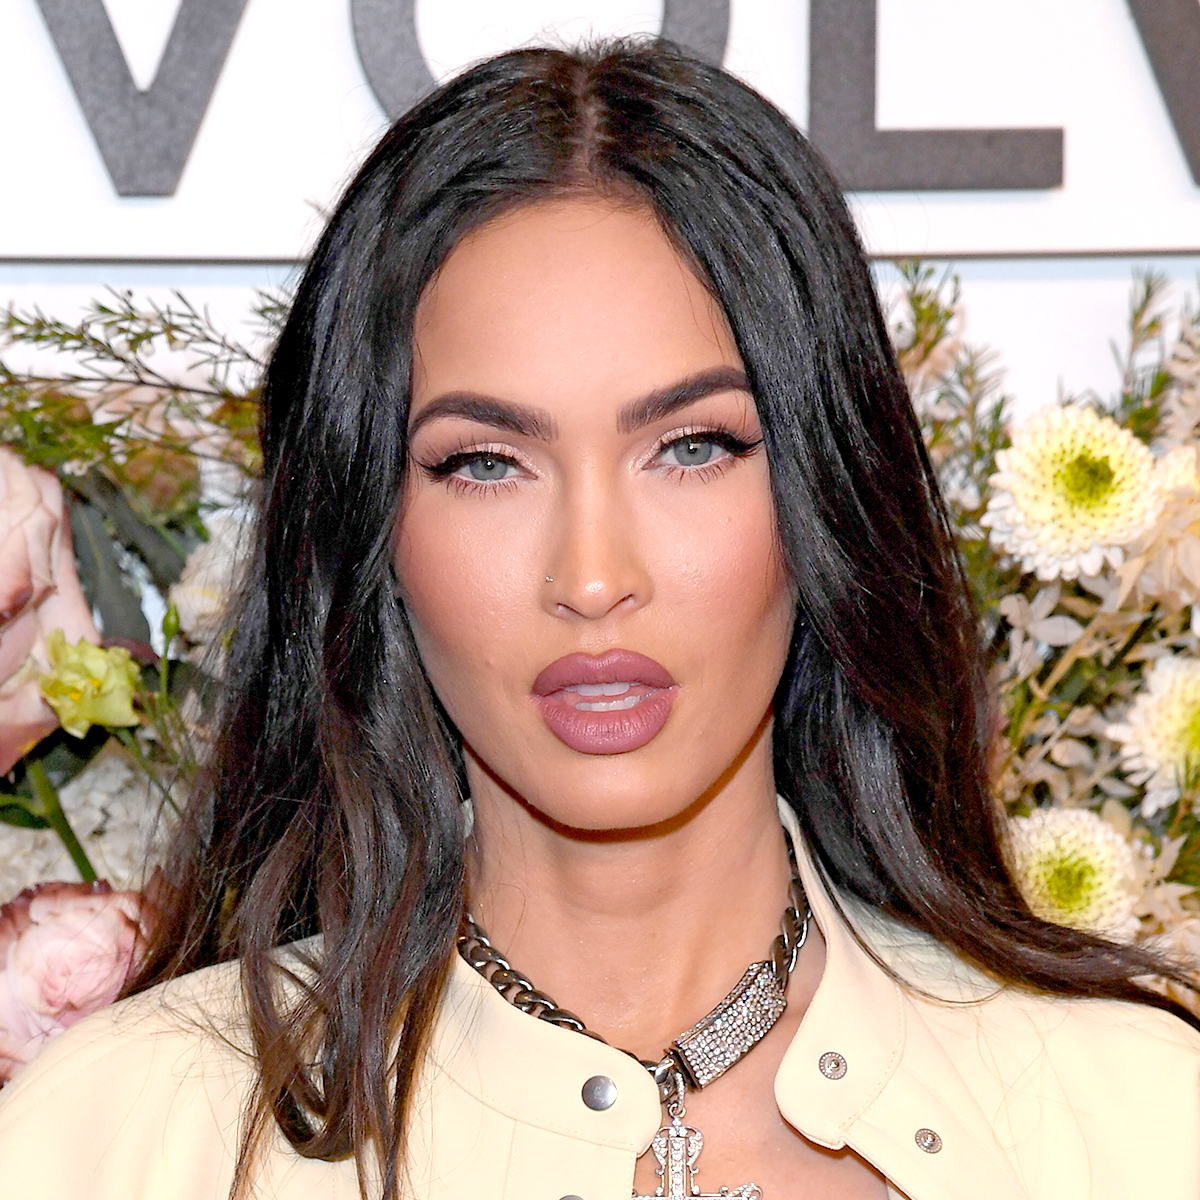 Megan Fox's Ridiculously Good Workout Outfit Includes the Most